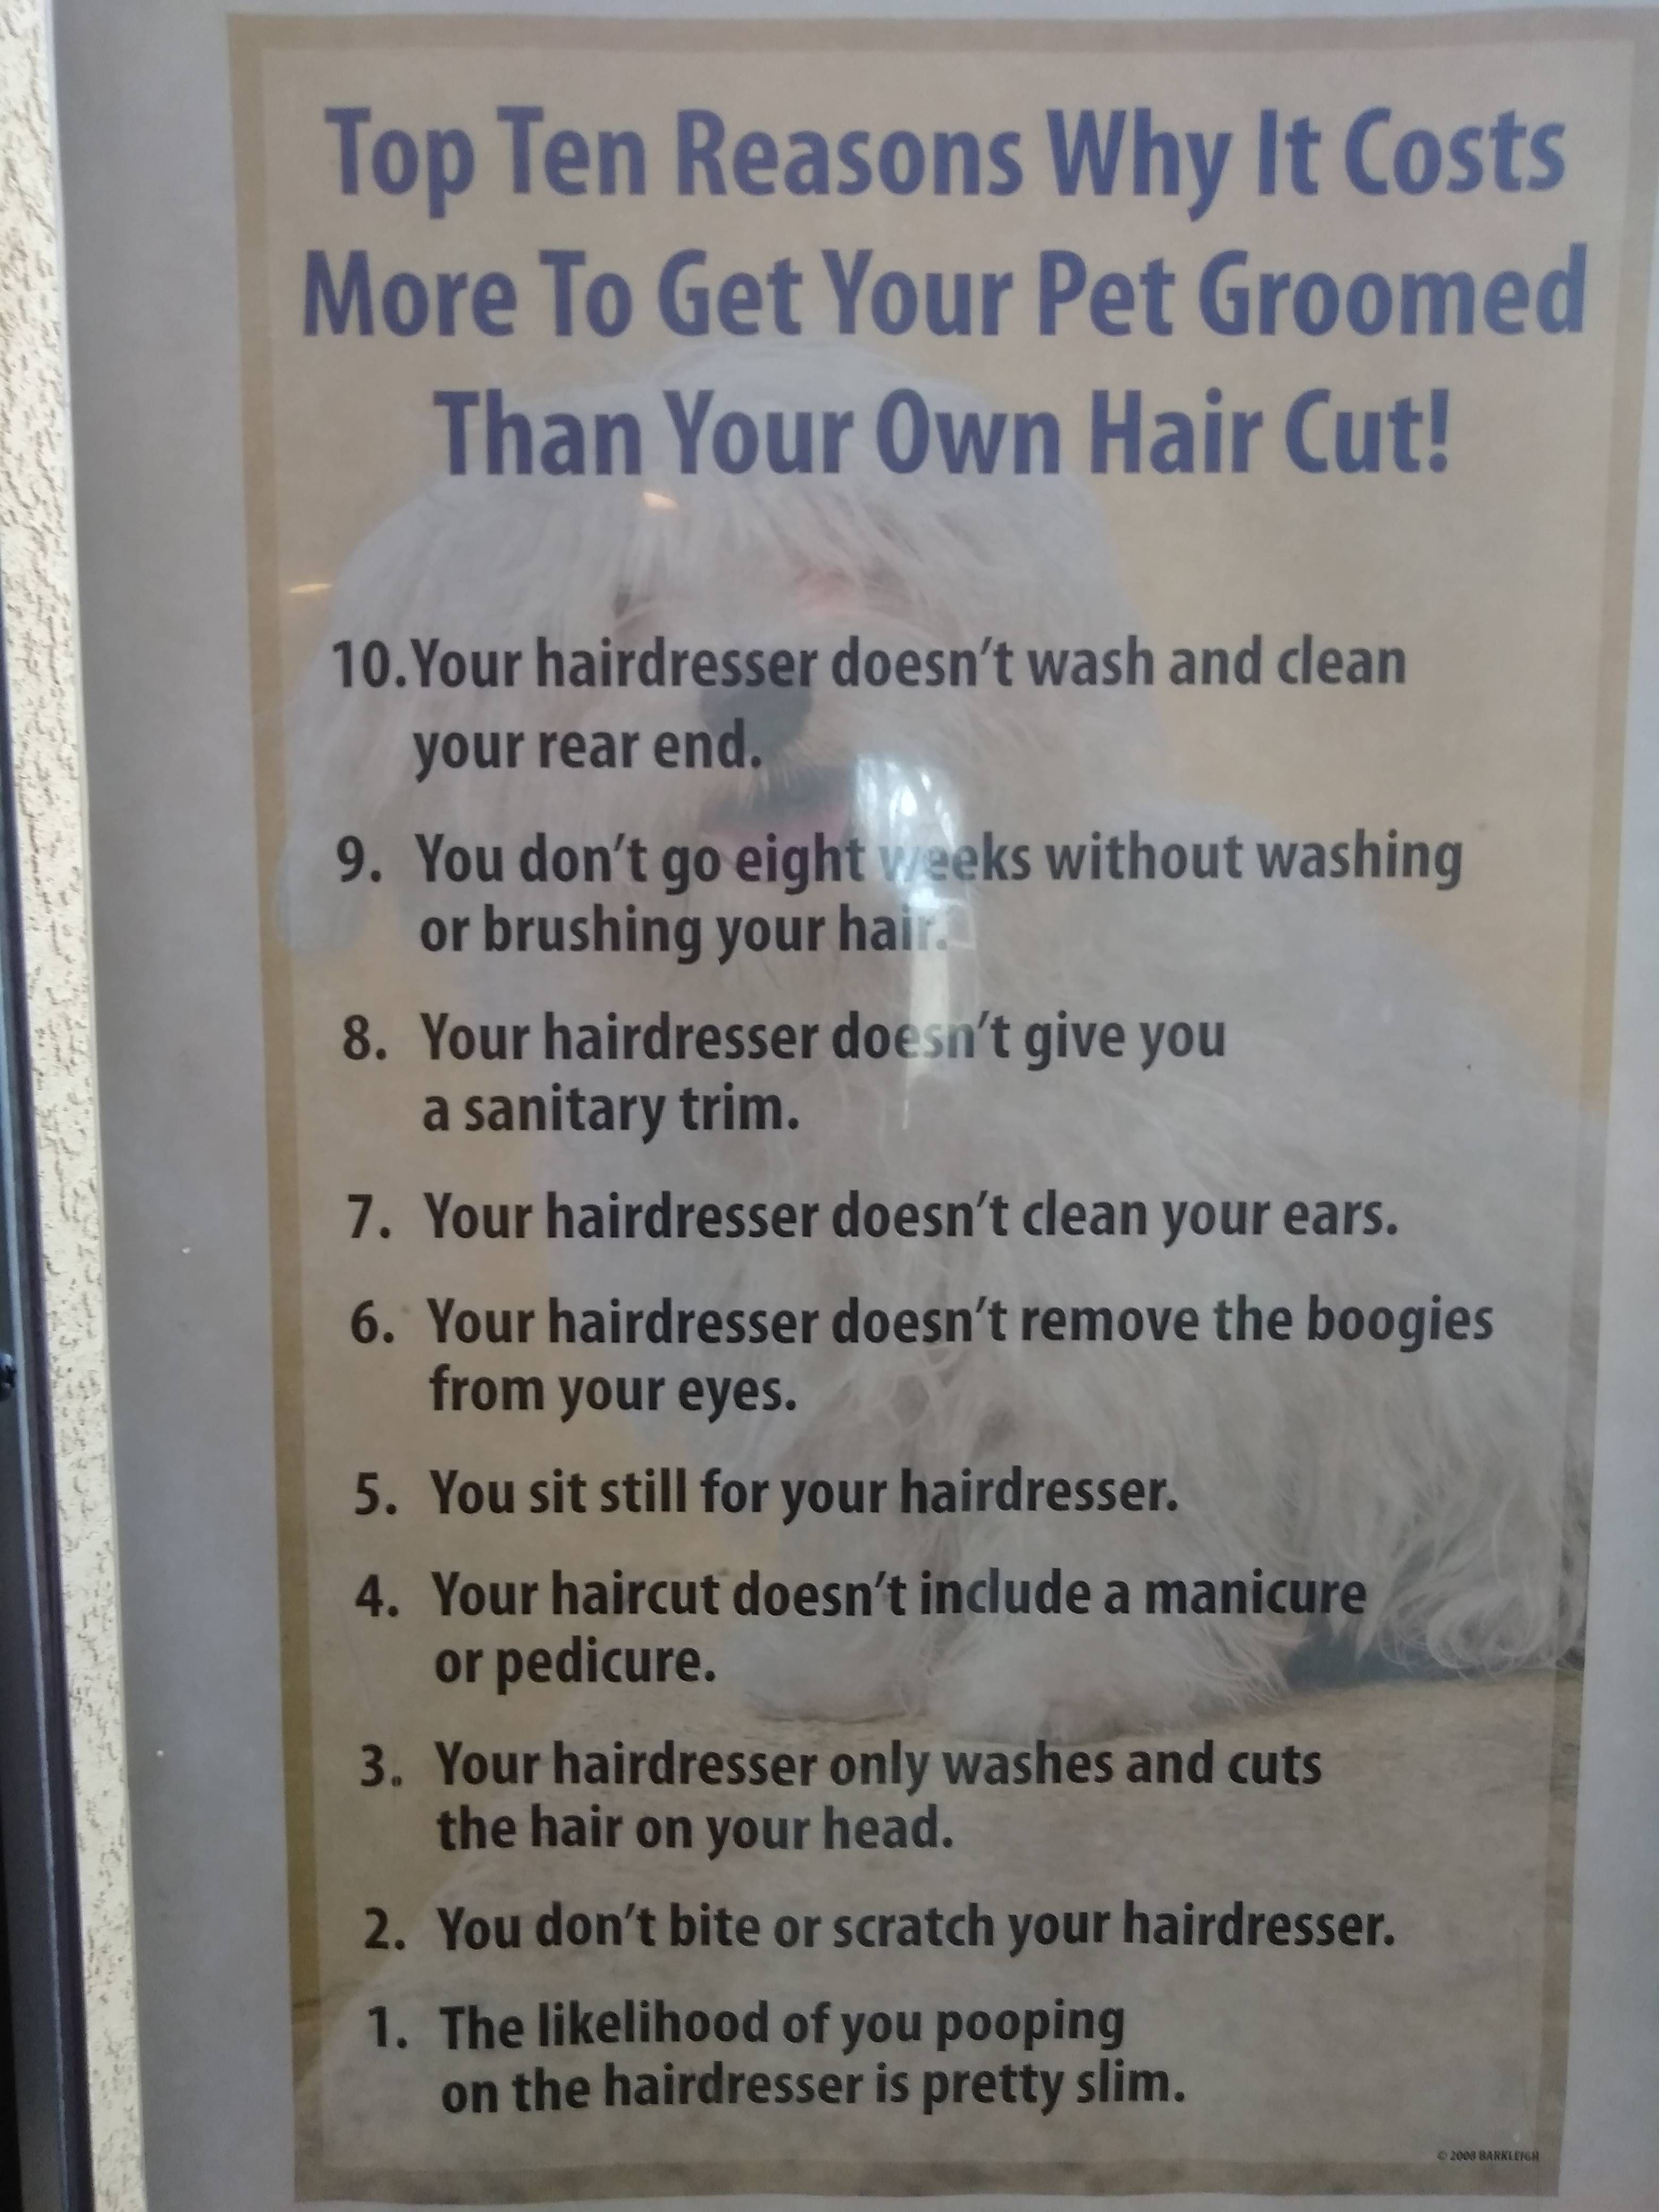 Sign at the dog groomer